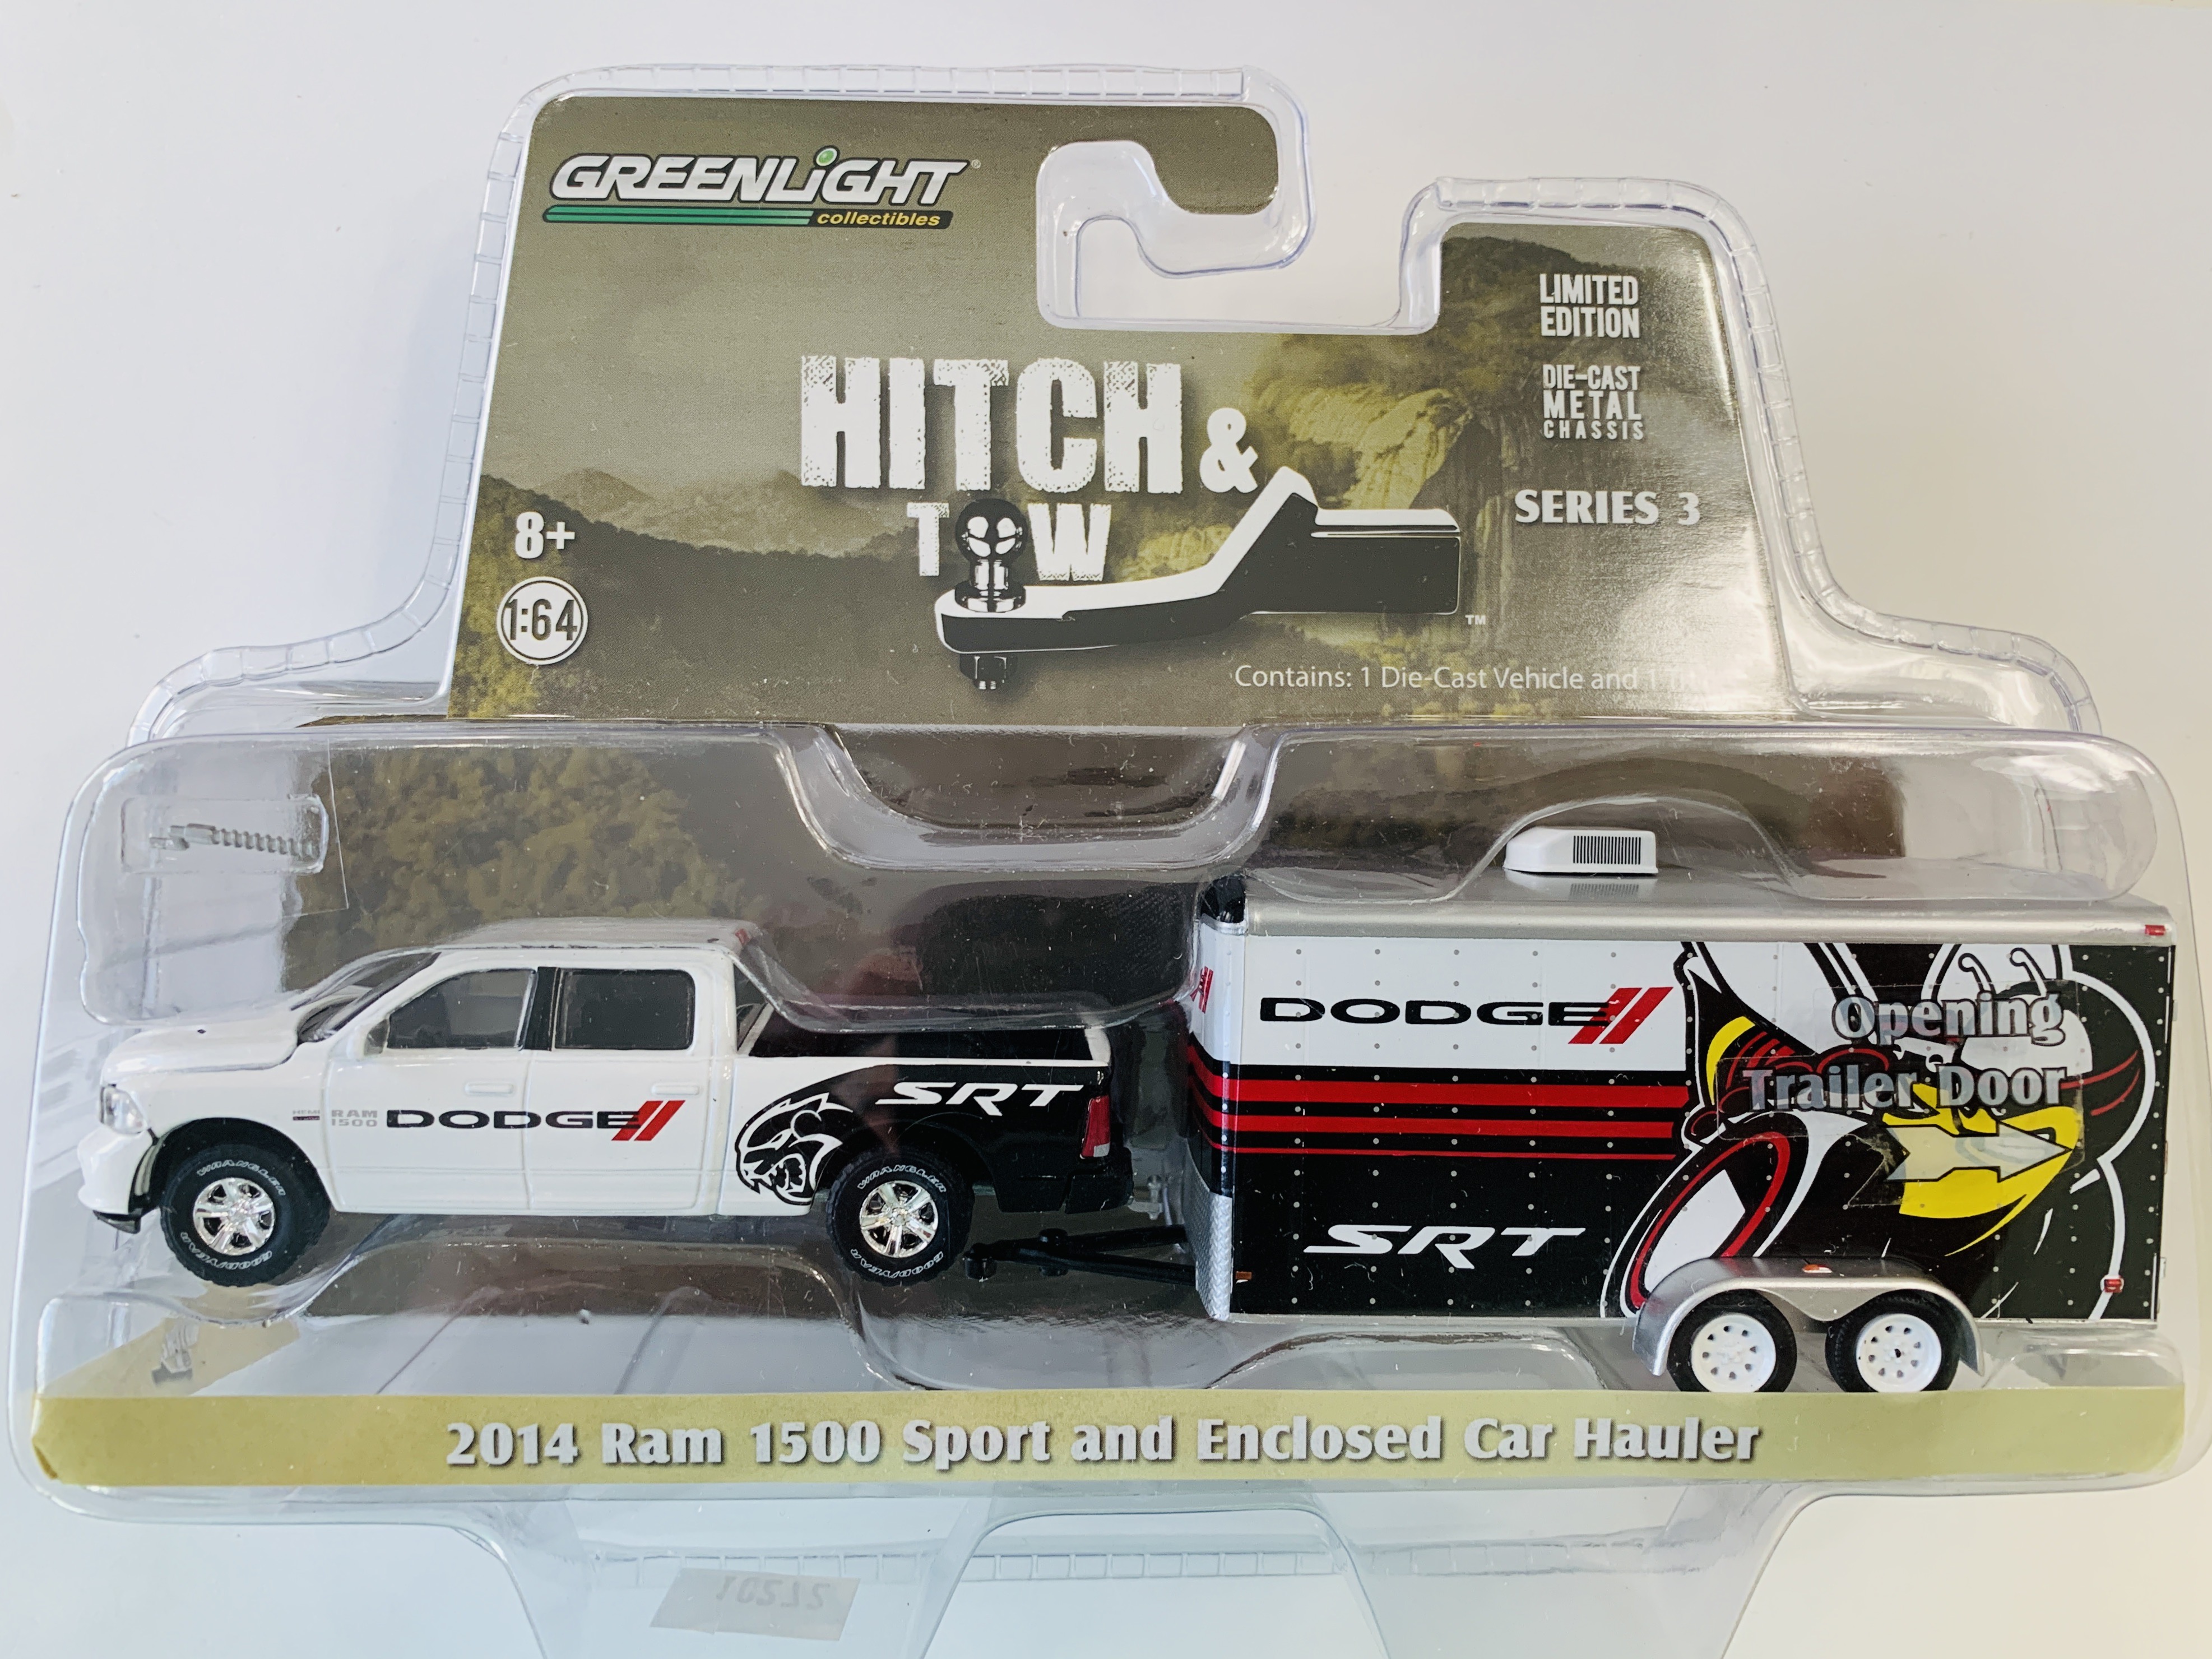 Greenlight Hitch & Tow 2014 RAM 1500 Sport And Enclosed Car Hauler